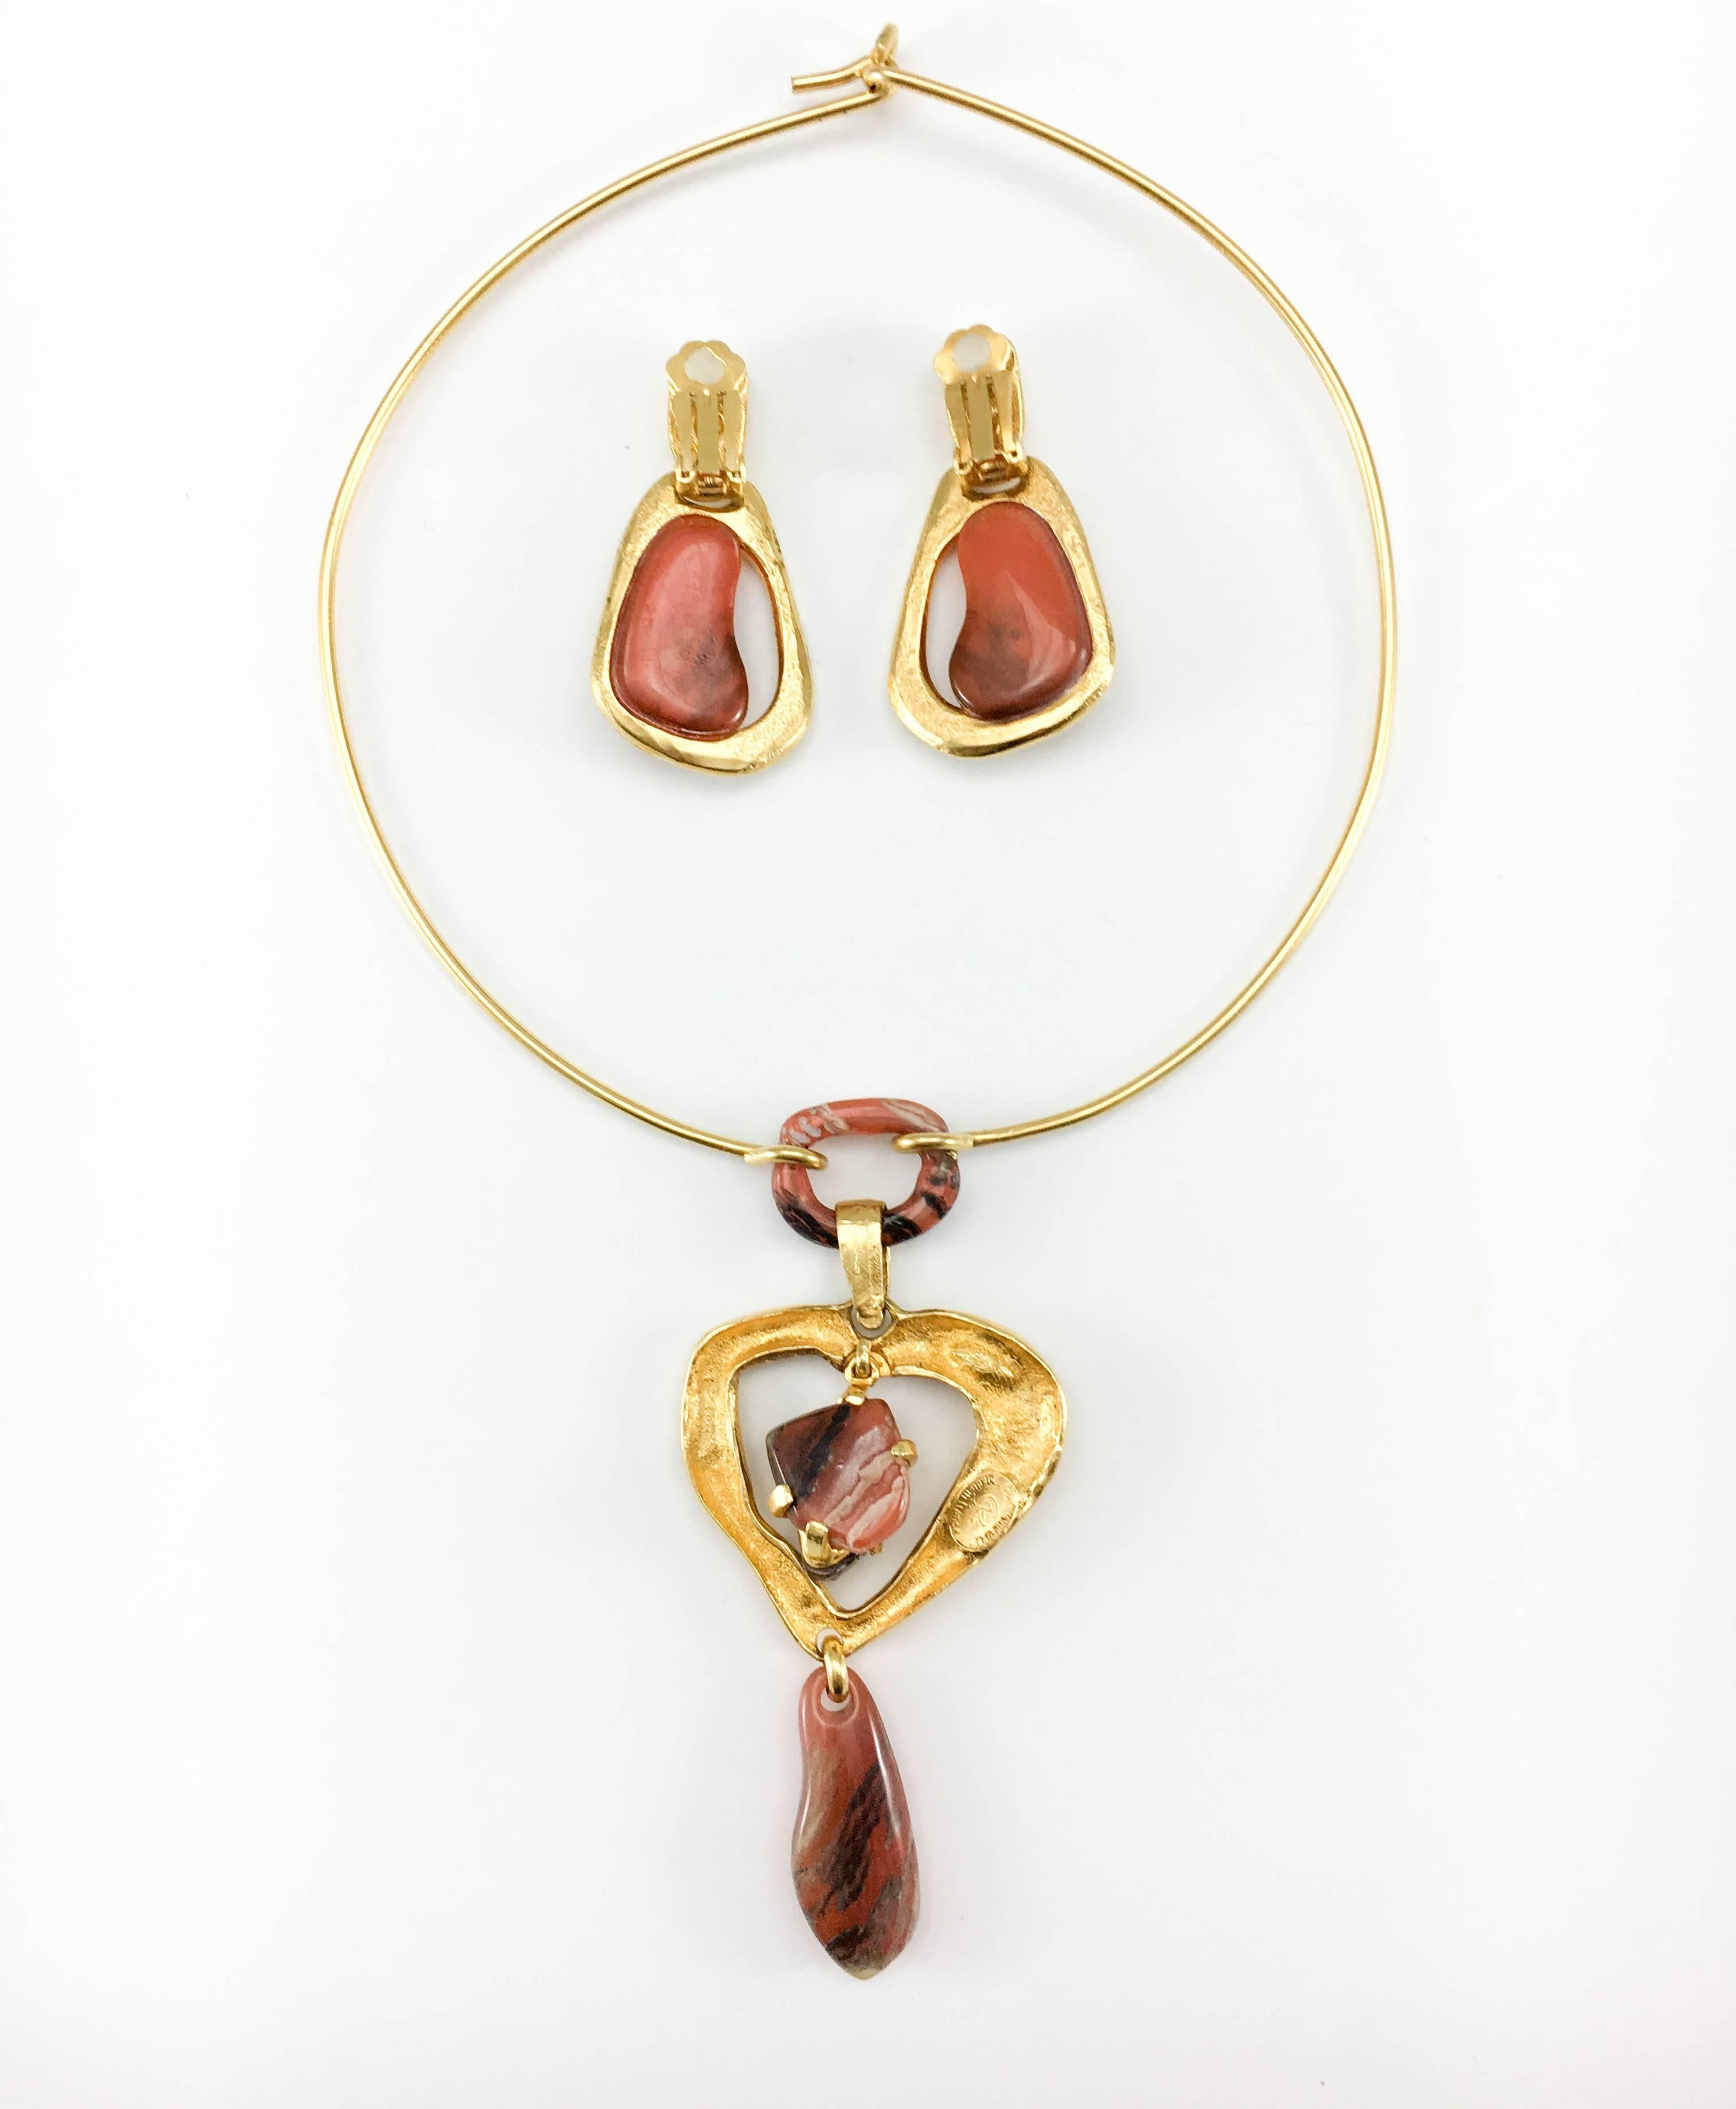 1980s Christian Lacroix Gold-Plated Modernist Necklace and Earrings Set 5